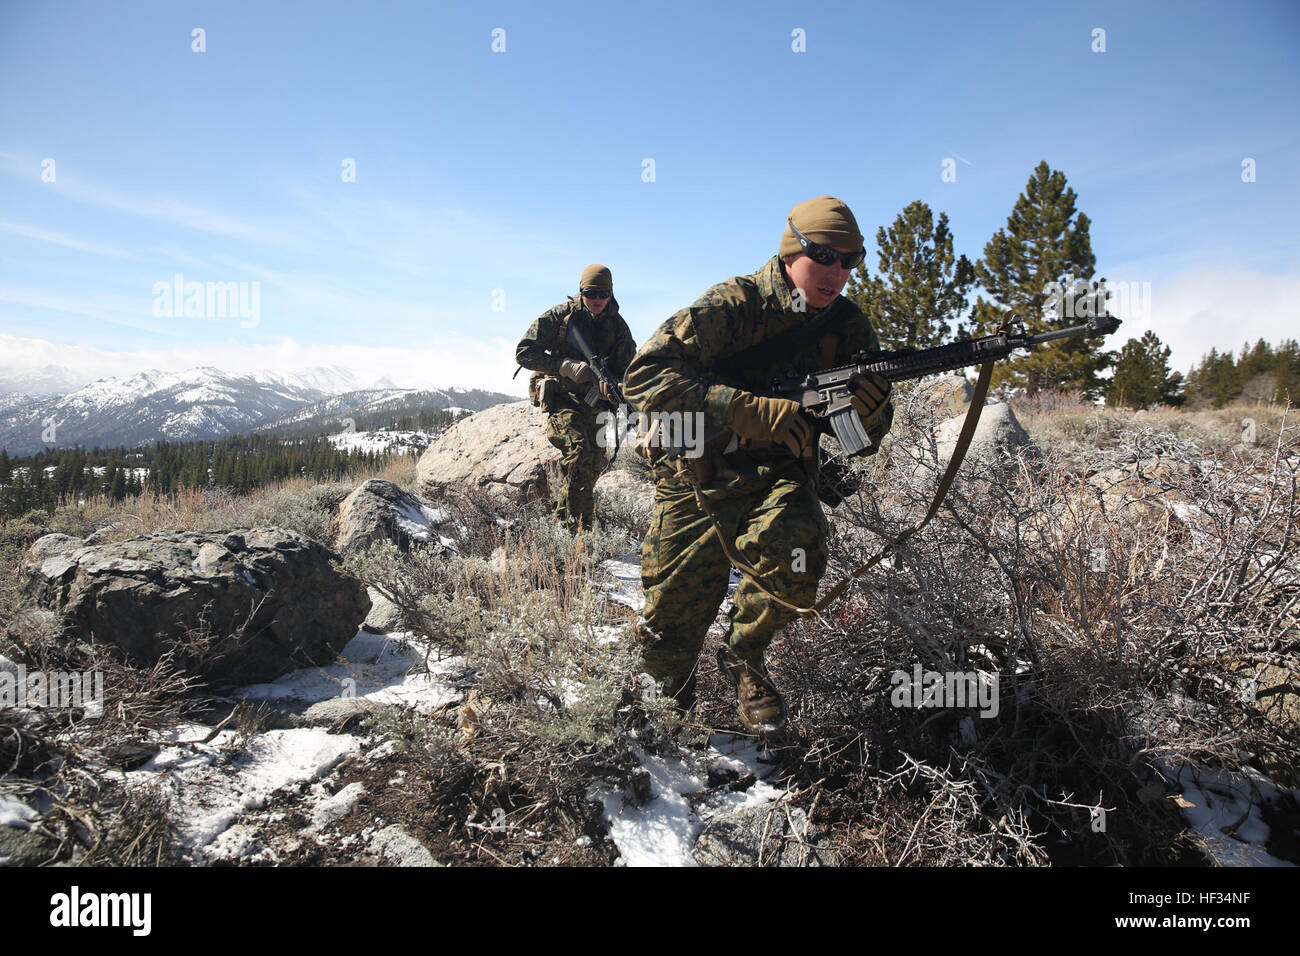 Lance Cpl. Taylor Trion, native of Tulsa, Okla., and Pfc. Joseph Tweedy, native of San Diego, assaultmen with 1st Battalion, 3rd Marine Regiment, sprint to cover during Mountain Training Exercise 2-15 at the Marine Corps Mountain Warfare Training Center, March 23, 2015. (Official Marine Corps photo by Cpl. Charles Santamaria/Released) 'Lava Dogs' prepare for 'every clime and place' 150323-M-YE994-043 Stock Photo